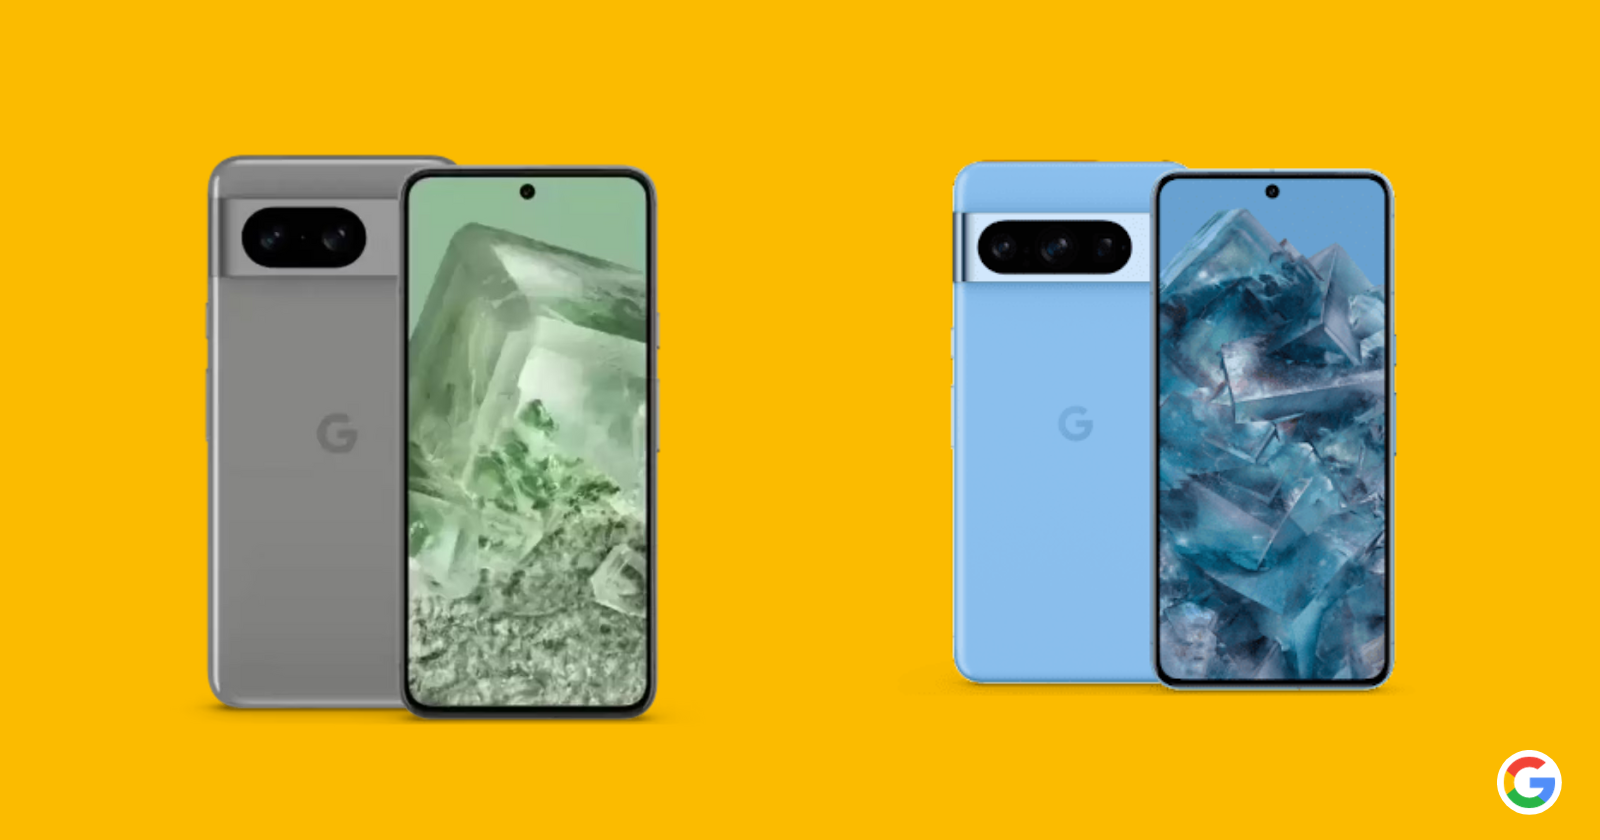 Opinion poll: Has Google lost its way with the Pixel lineup?